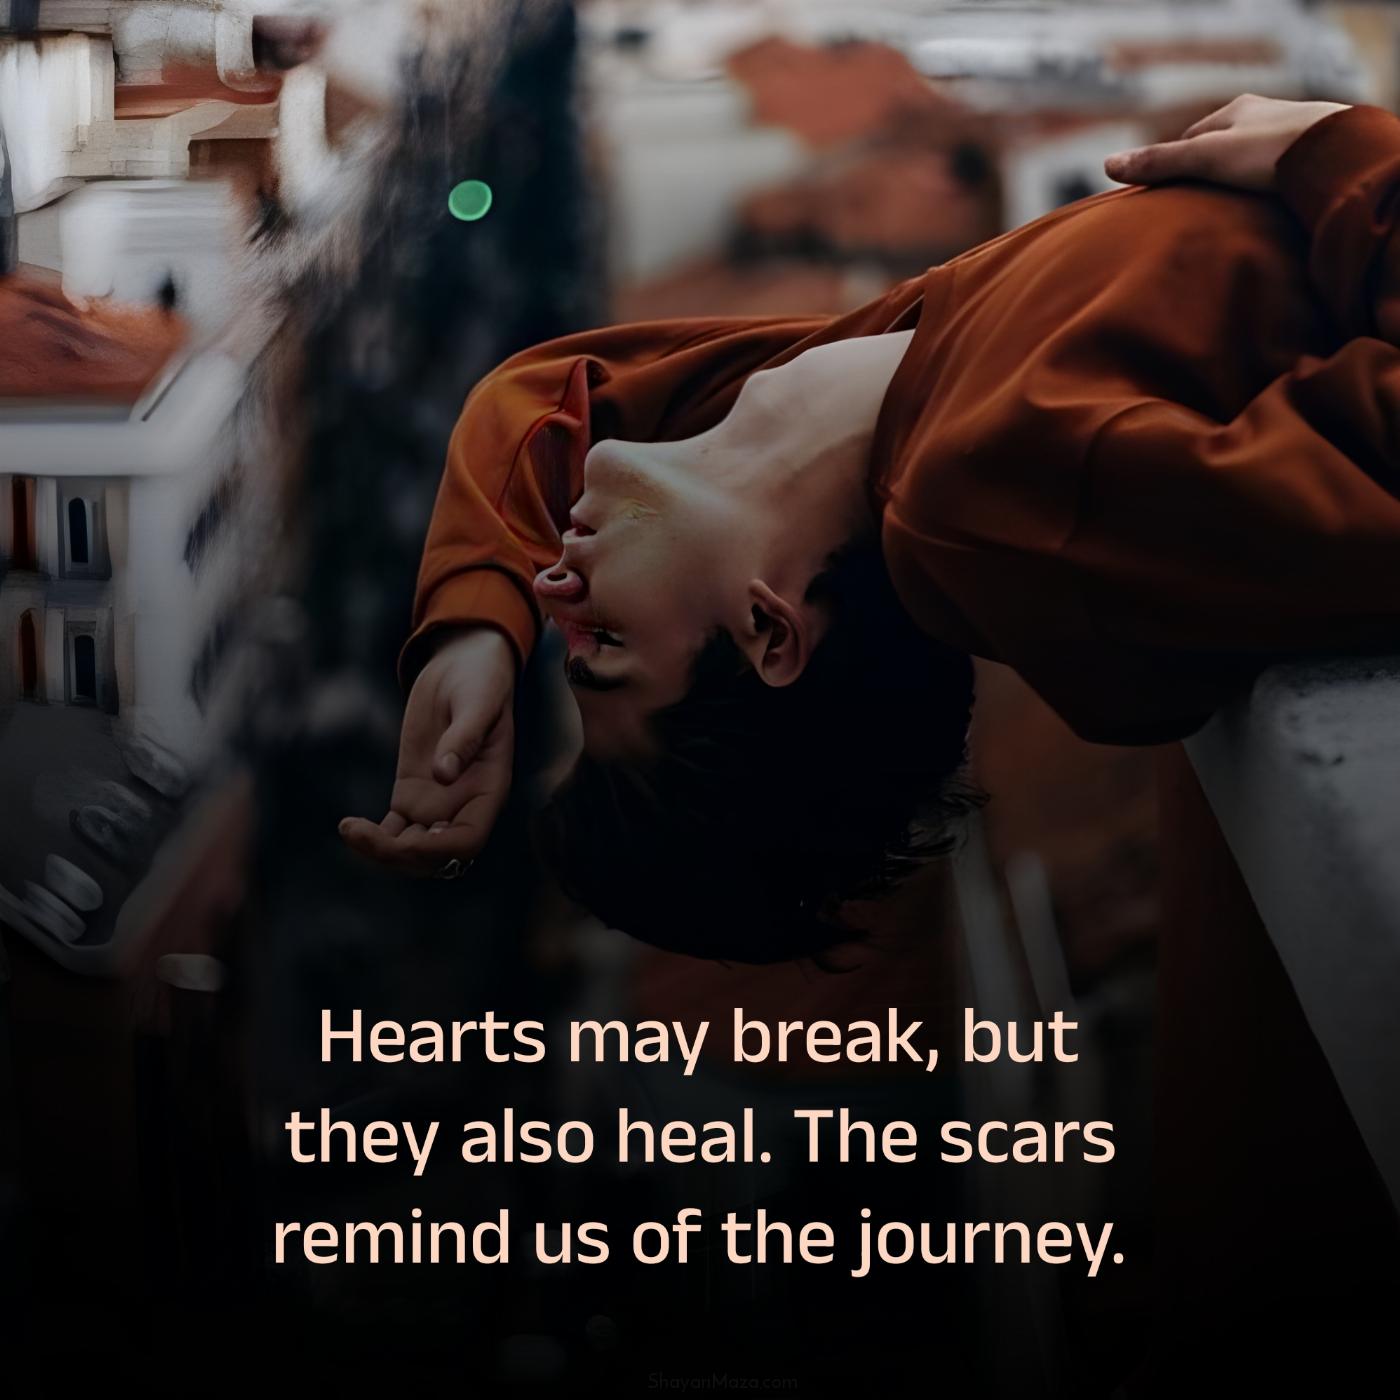 Hearts may break but they also heal